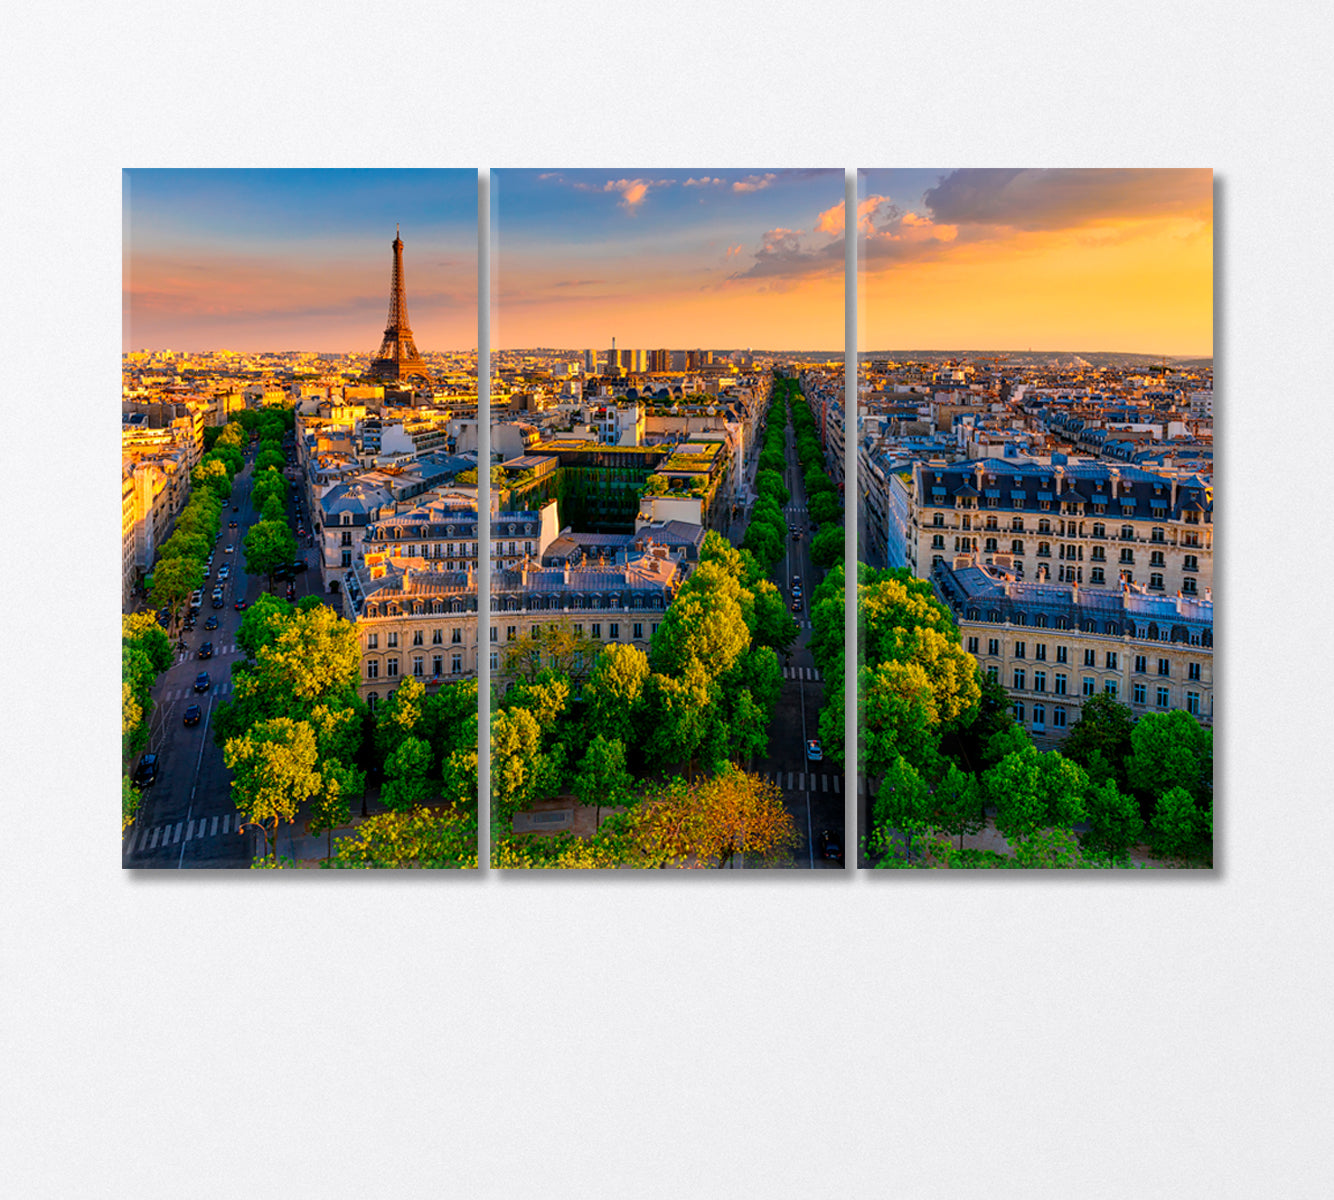 Panoramic View of Paris With the Eiffel Tower Canvas Print-Canvas Print-CetArt-3 Panels-36x24 inches-CetArt